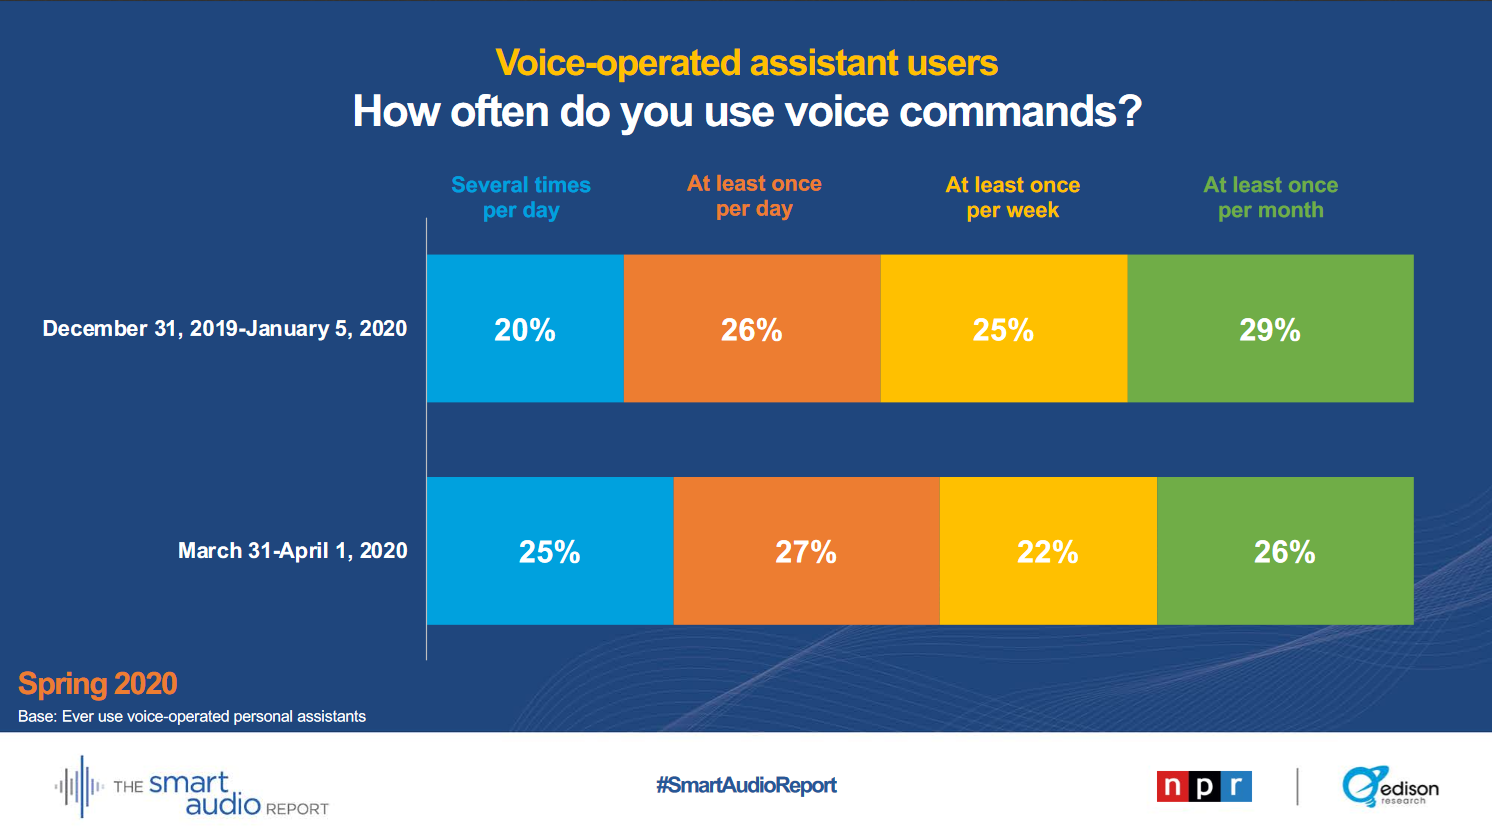 52% of people were using voice search commands at least daily by April 1